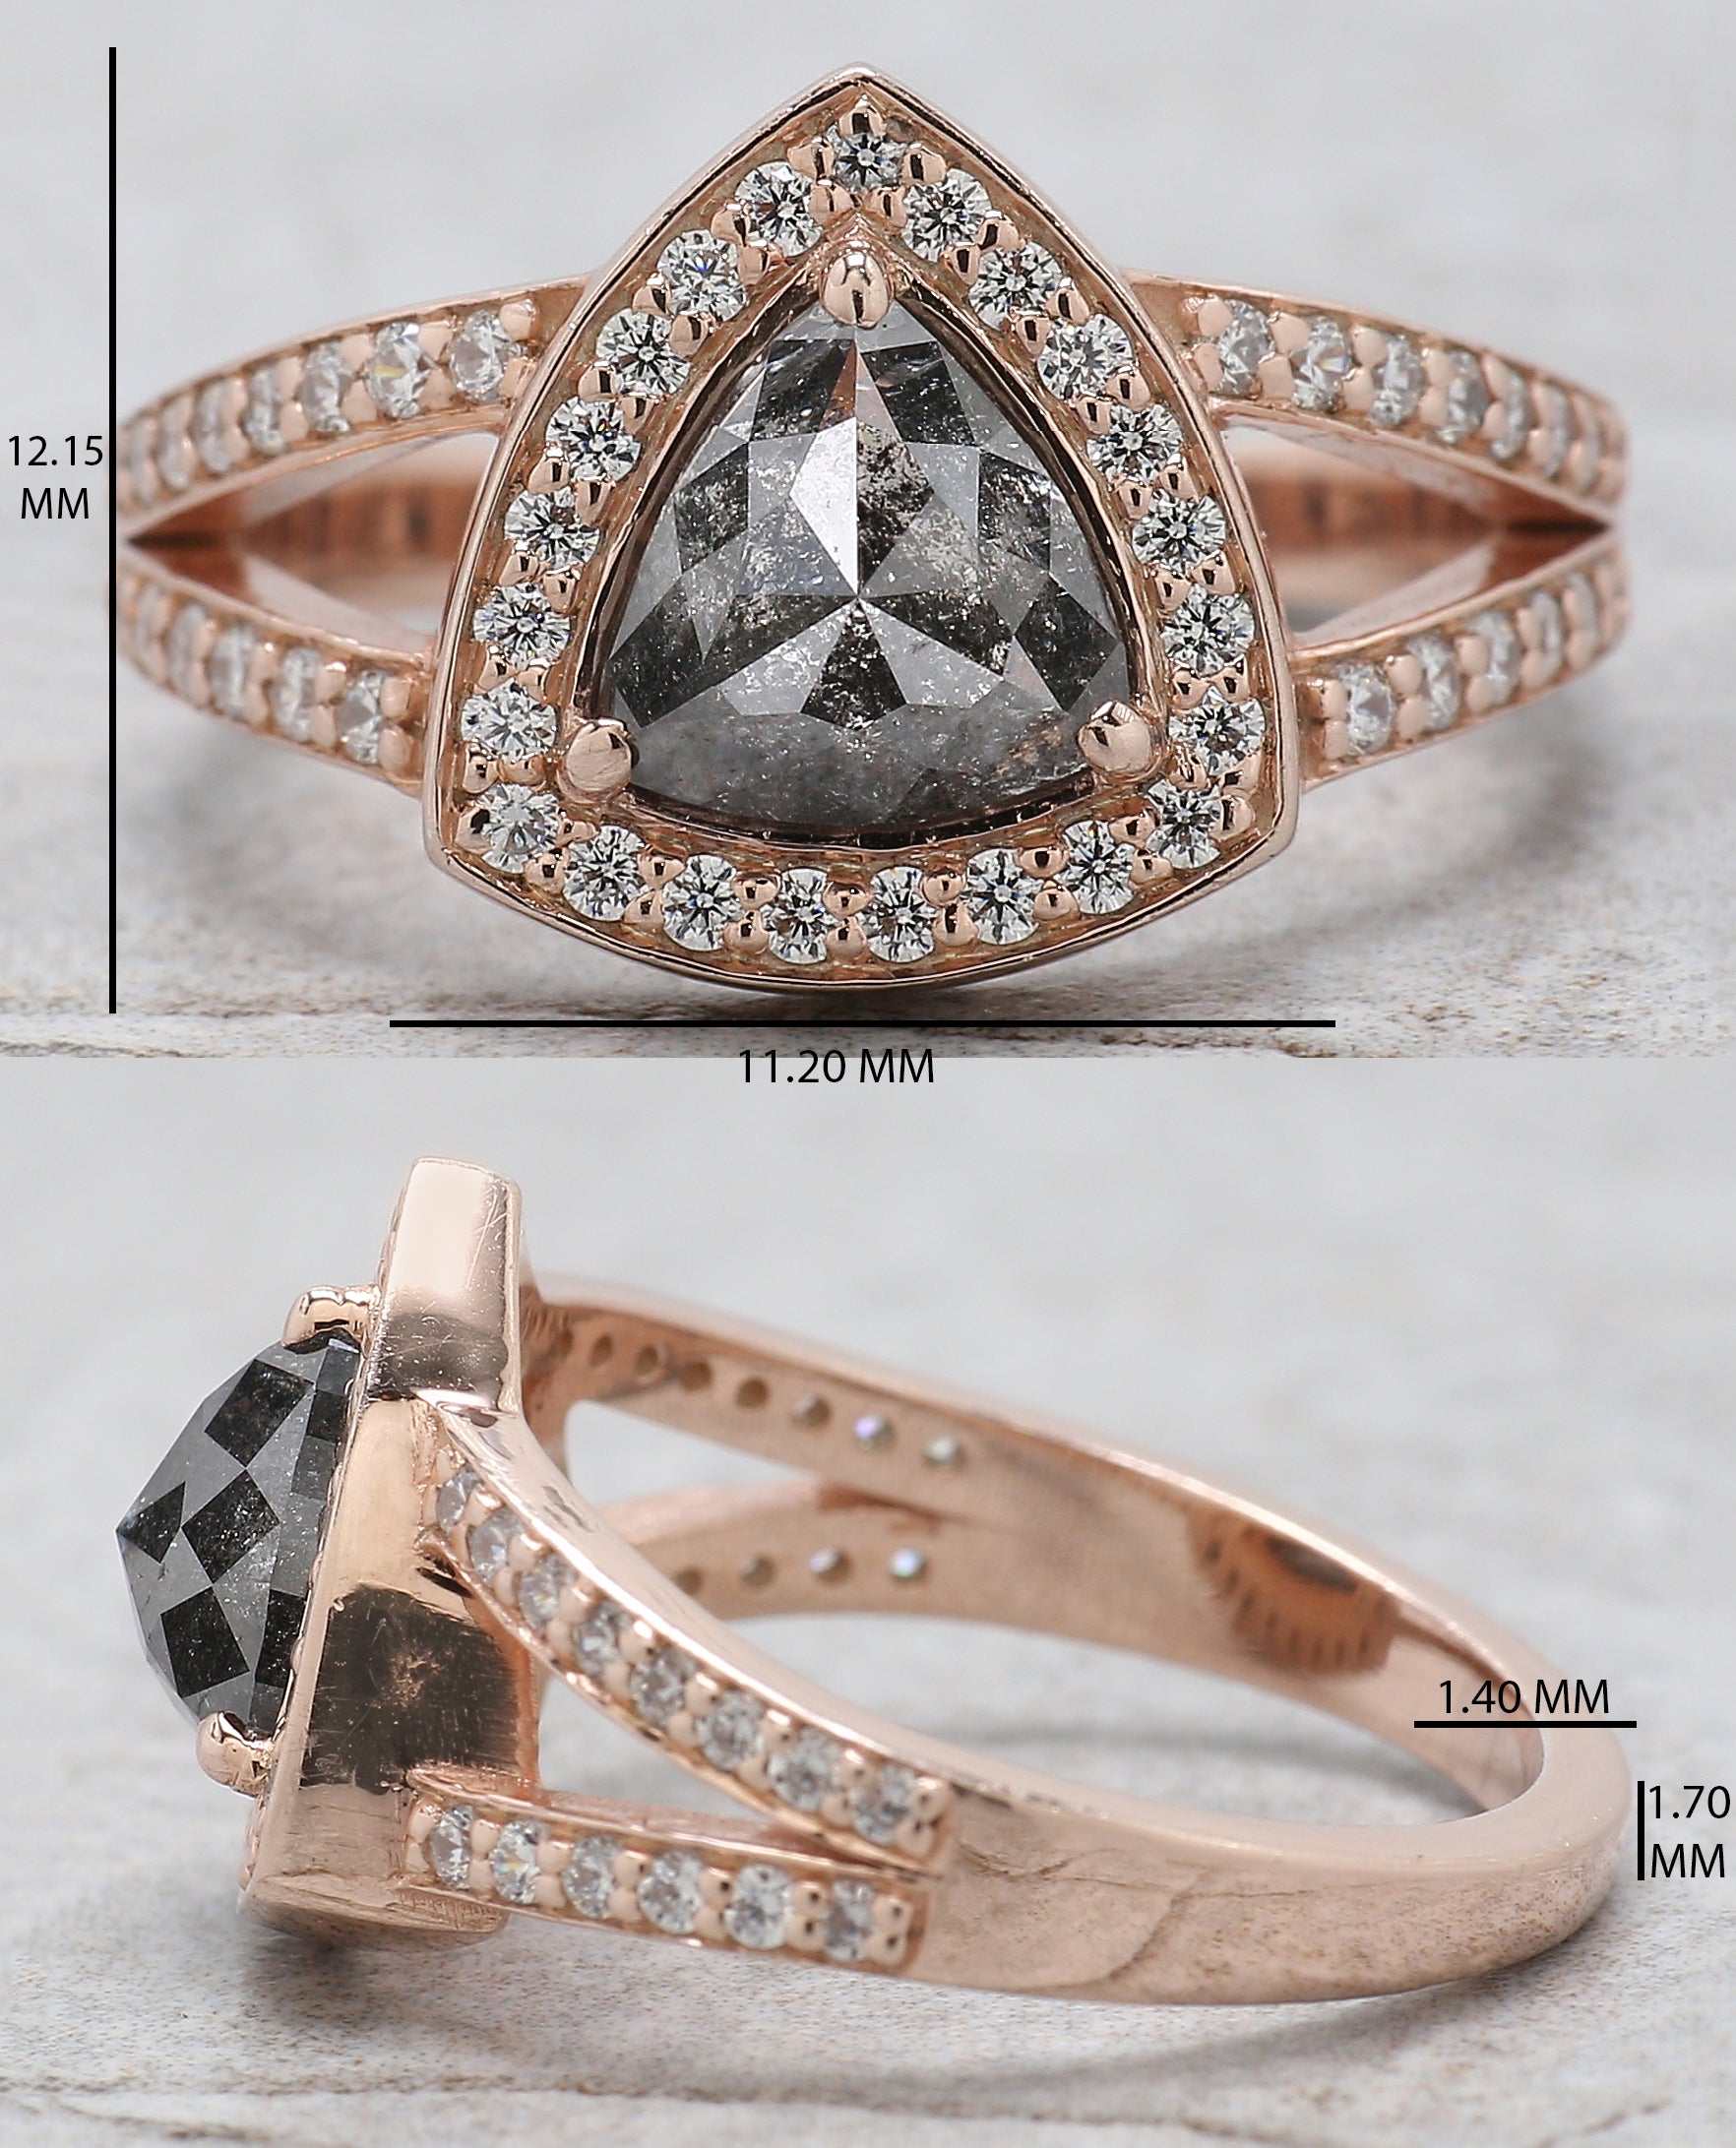 Triangle Cut Salt And Pepper Diamond Ring 1.27 Ct 7.00 MM Triangle Shape Diamond Ring 14K Solid Rose Gold Engagement Ring Gift For Her QN9661